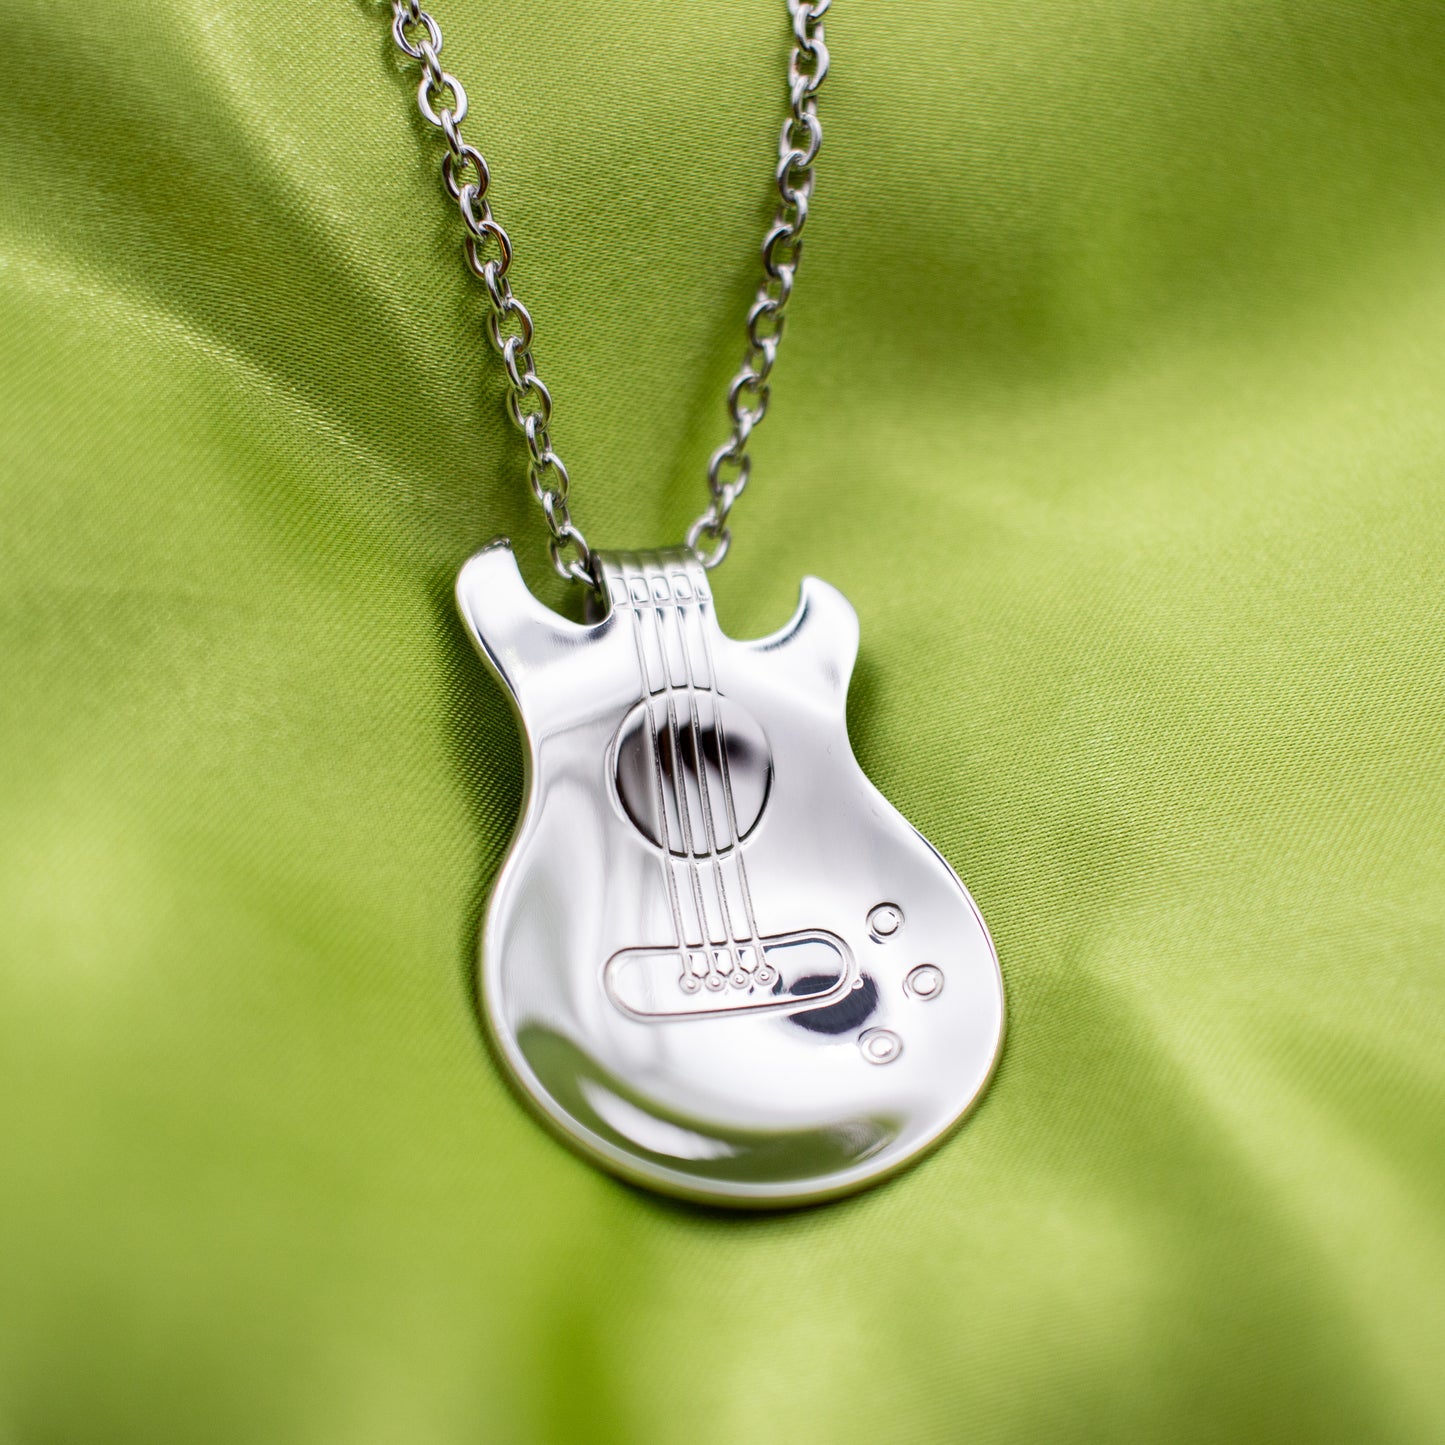 Bass Guitar Spoon Necklace